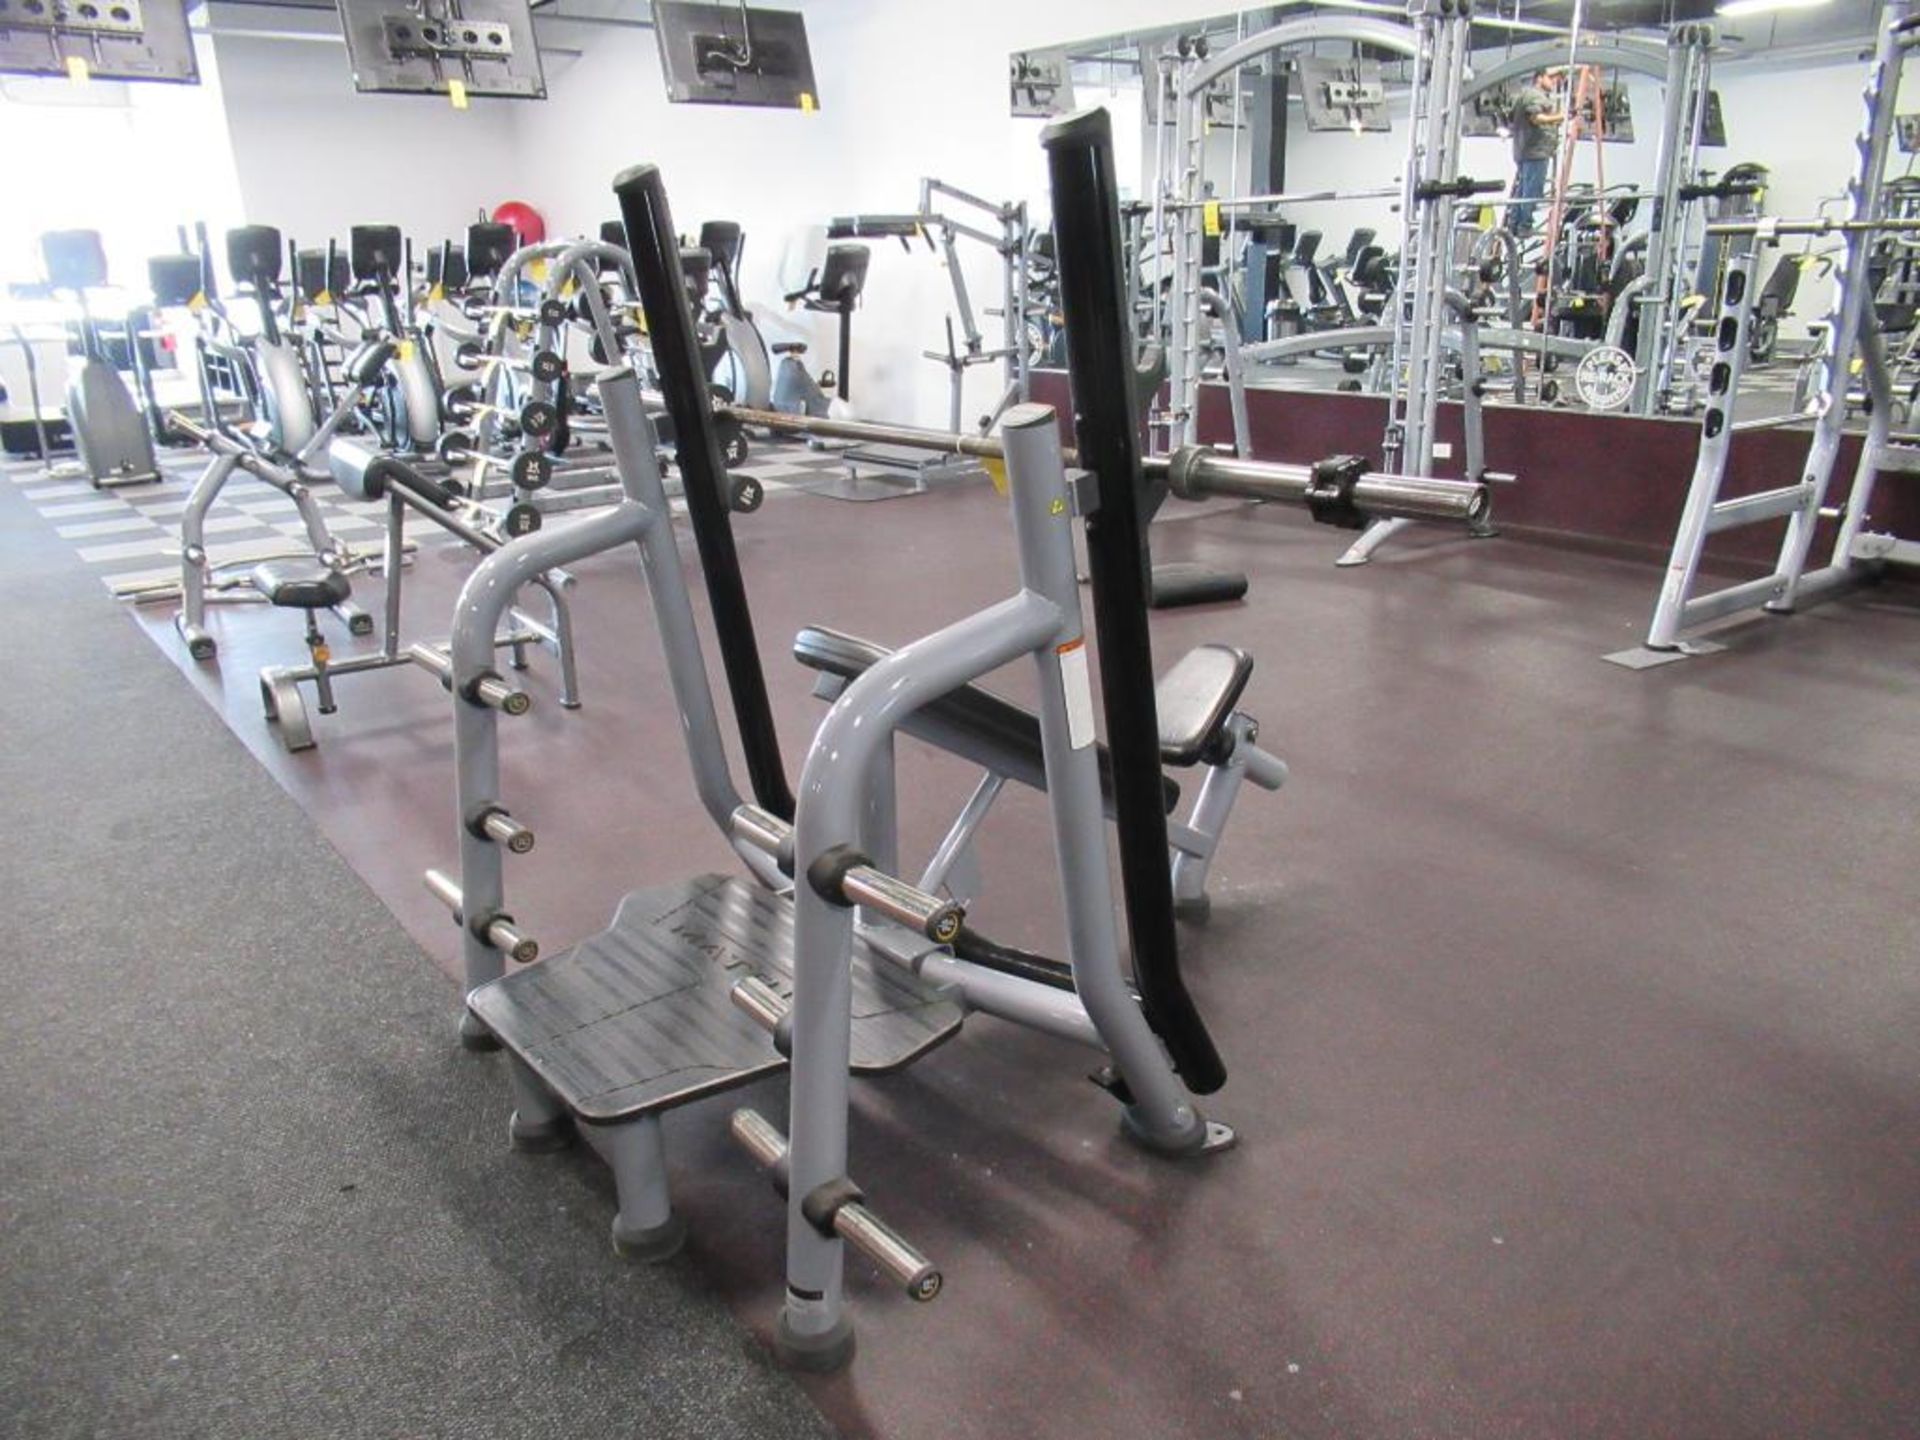 Matrix Model MG-A679B-04 Plated Loaded Bench Press, Spotting Deck, Plate Storage, Max Weight 400 lbs - Image 3 of 5